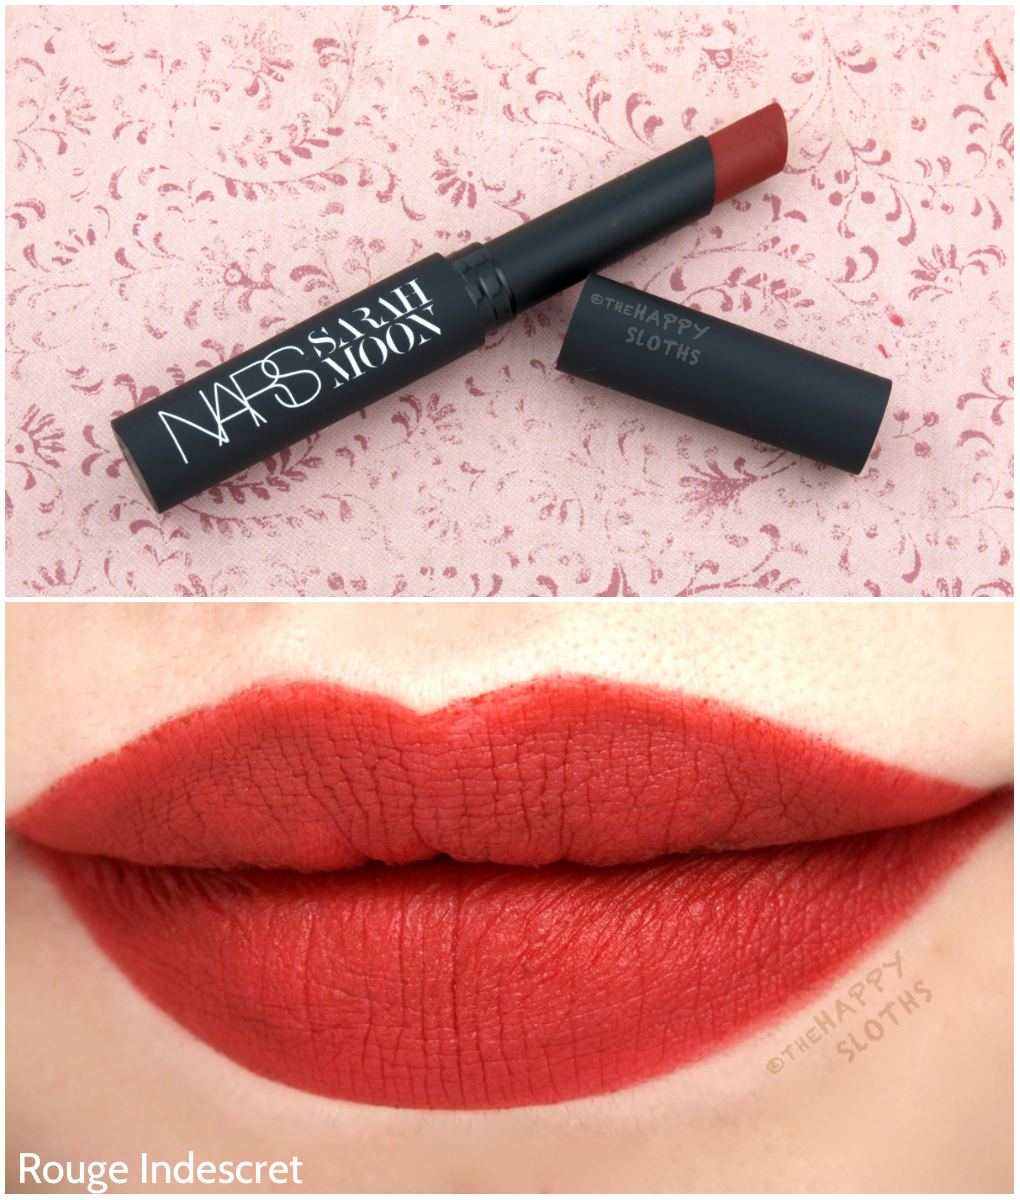 NARS Holiday 2016 Sarah Moon Matte Lipstick Review and Swatches